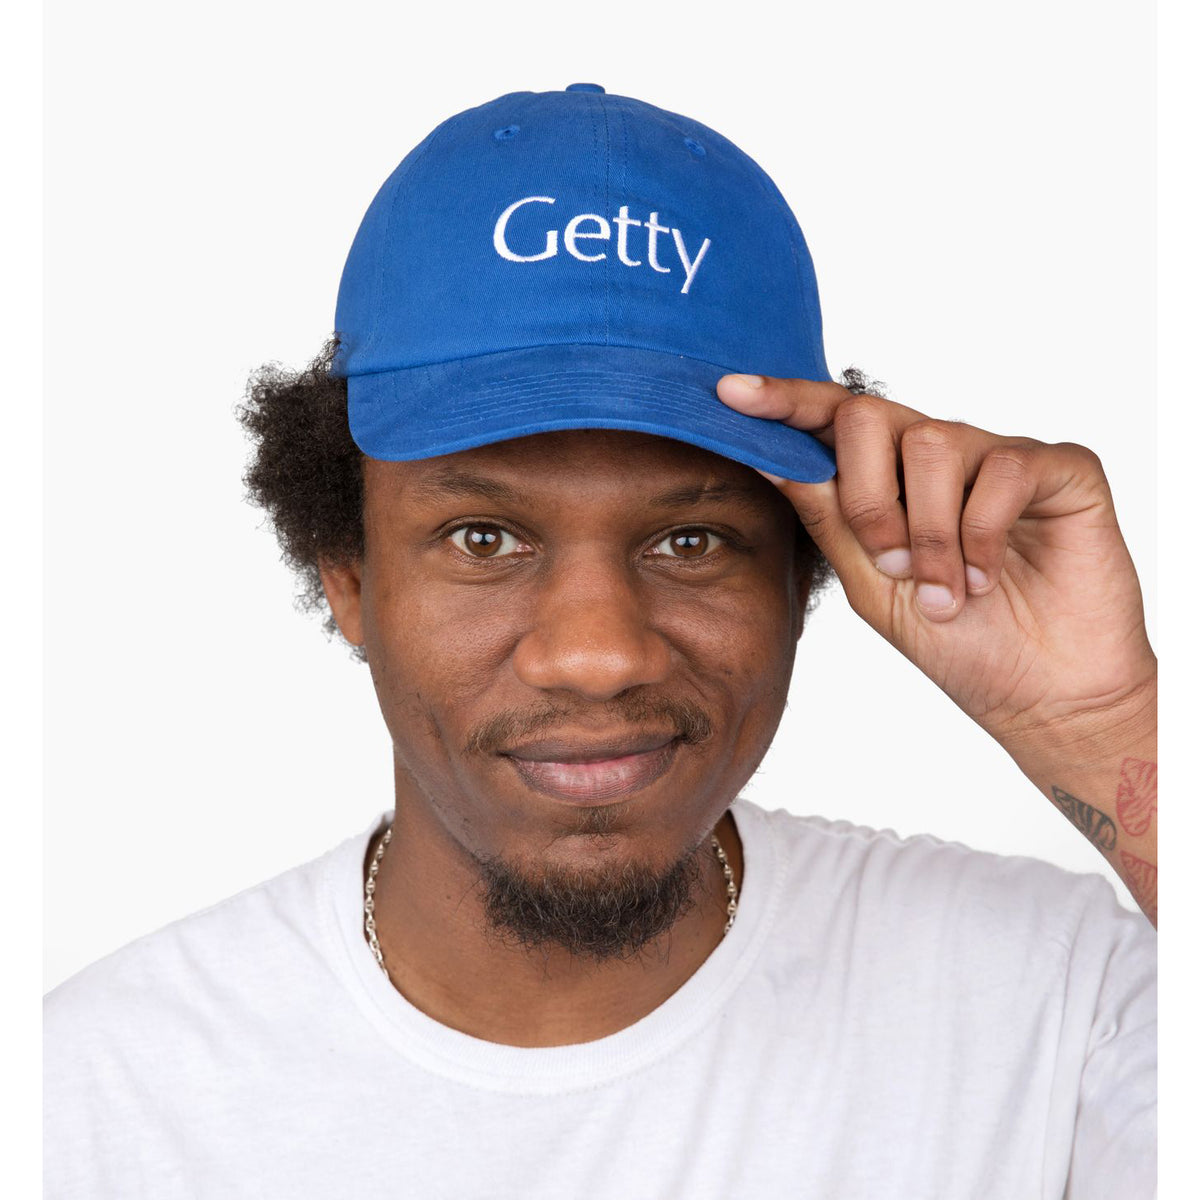 Getty Embroidered Logo Cap - Blue